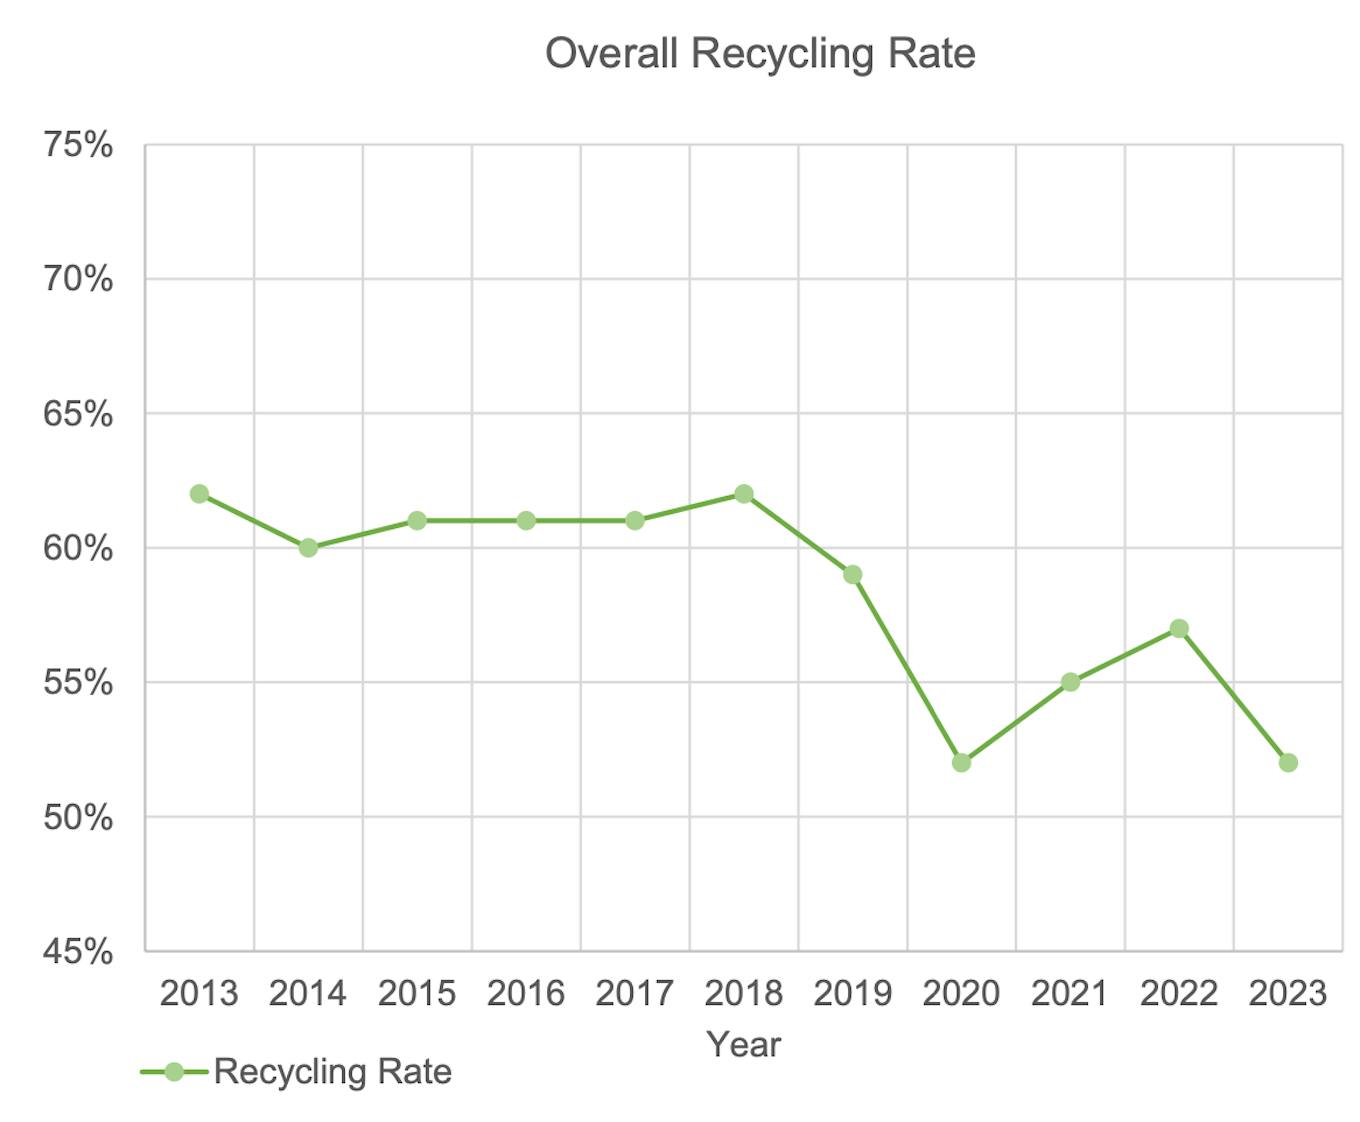 Singapore's overall recycling rate over the last 10 years